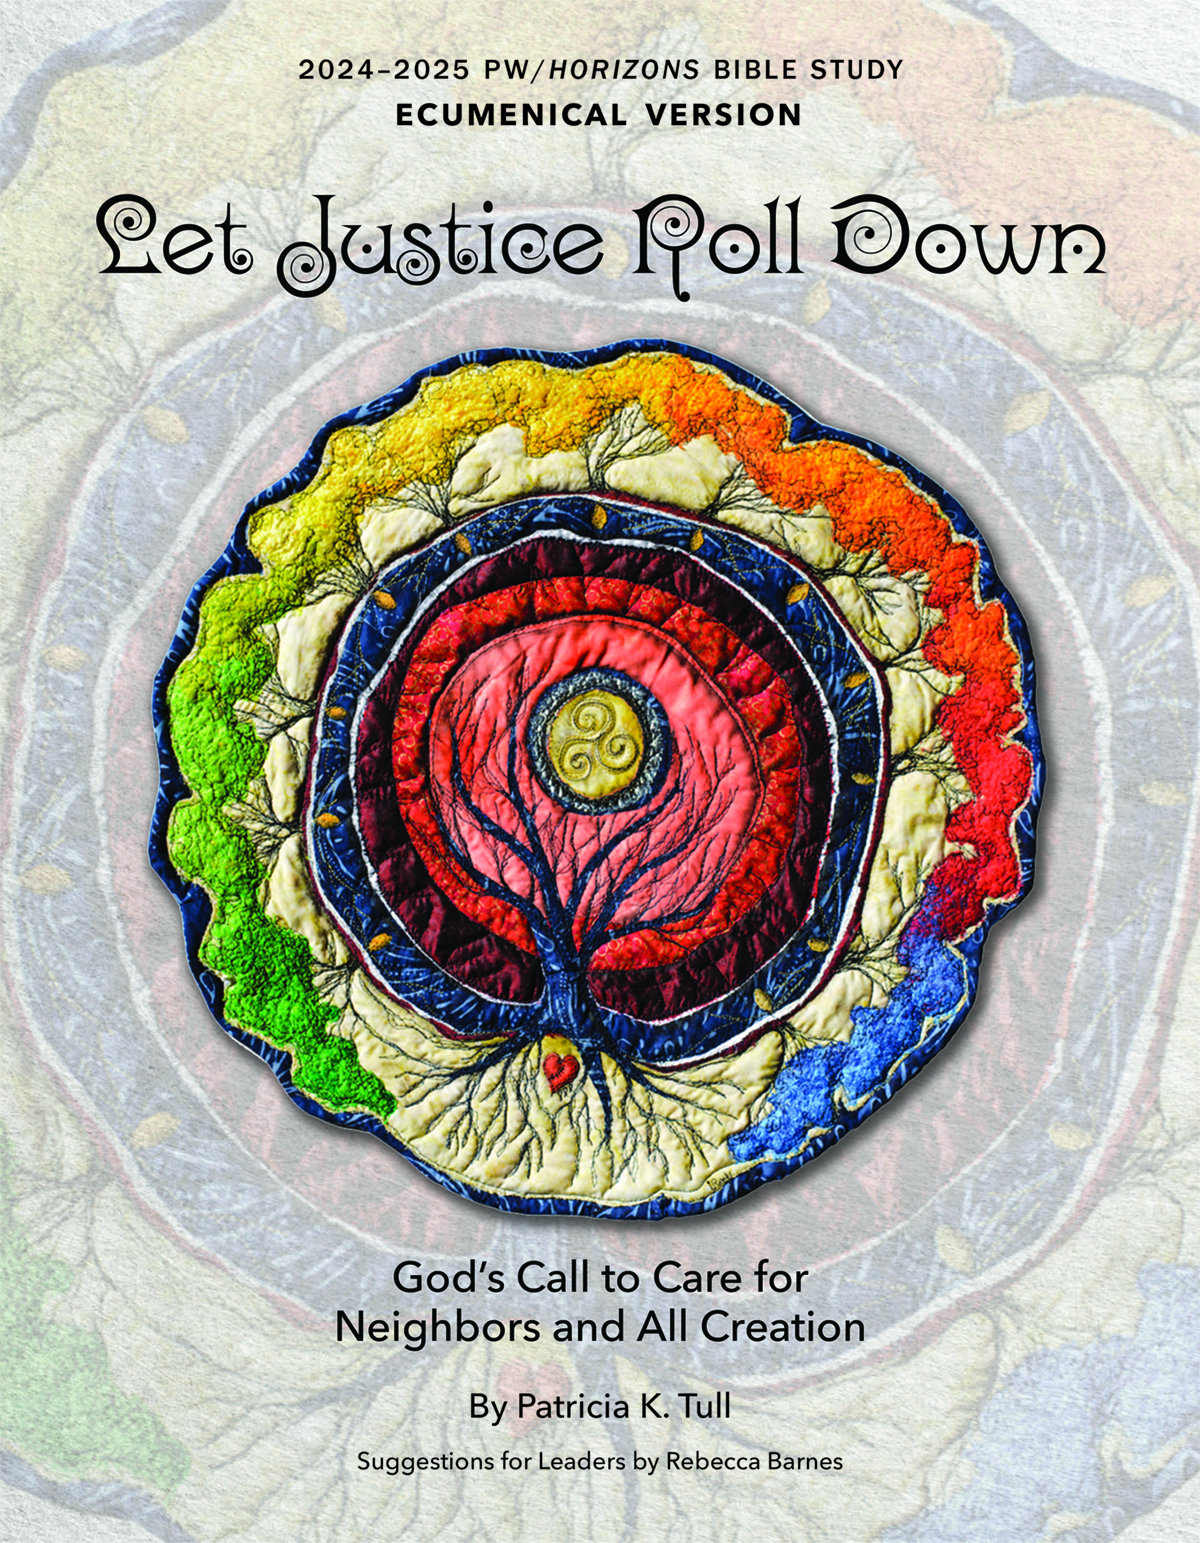 <i>Let Justice Roll Down</i> Ecumenical Edition